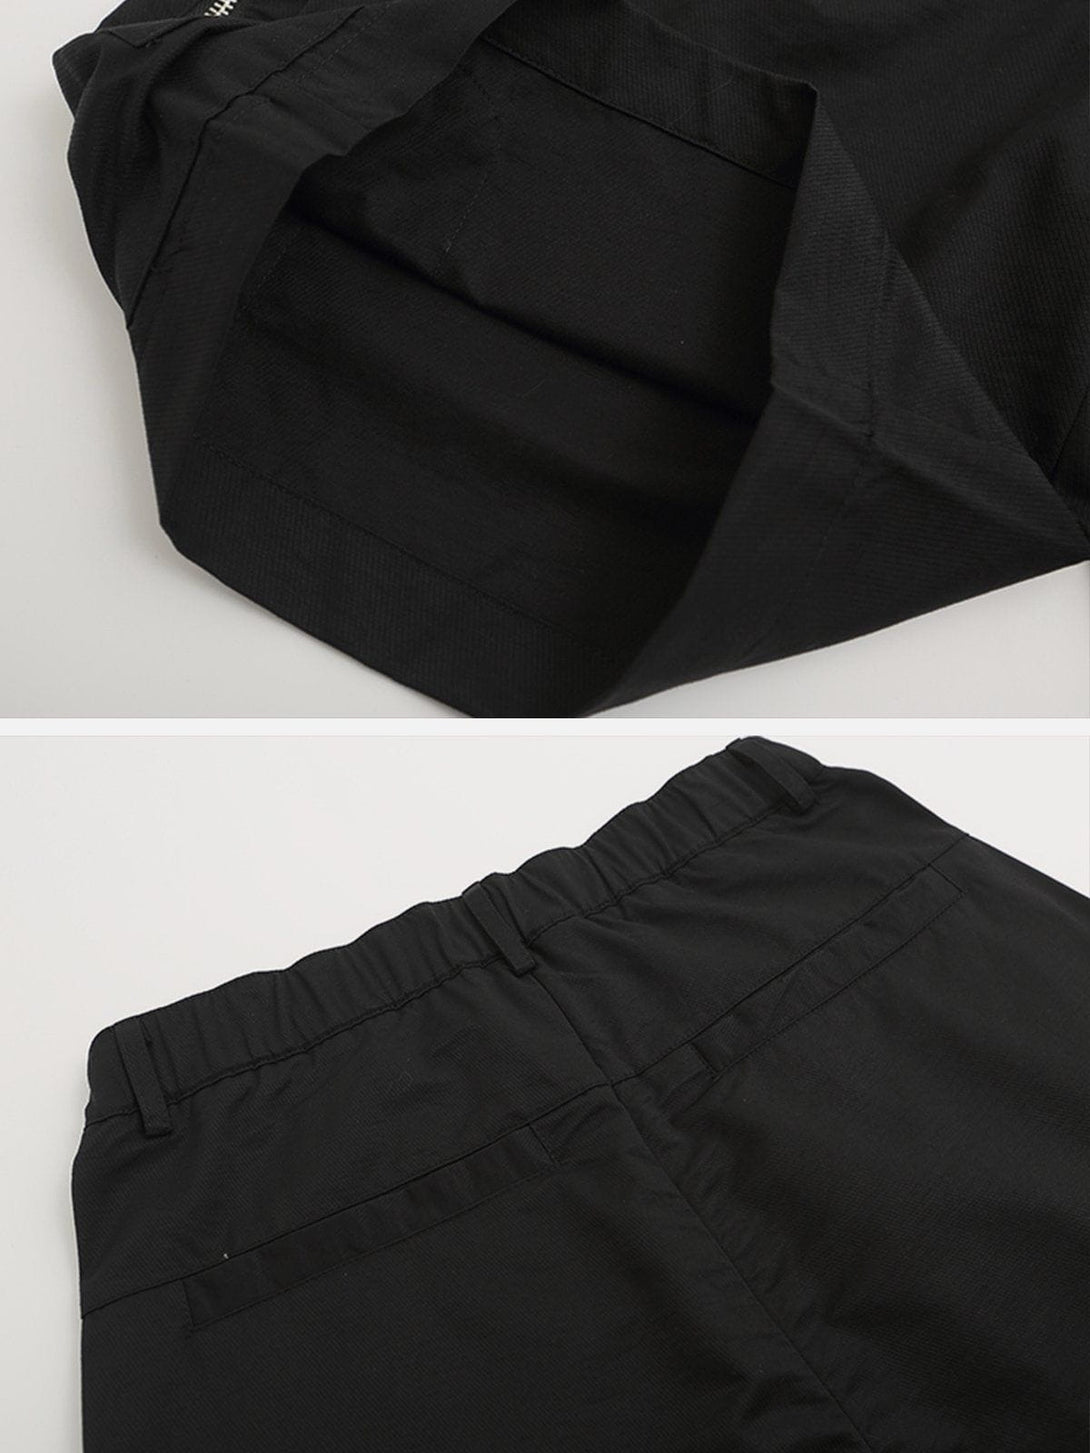 Levefly - Solid Color Side Zipper Pockets Cargo Shorts - Streetwear Fashion - levefly.com